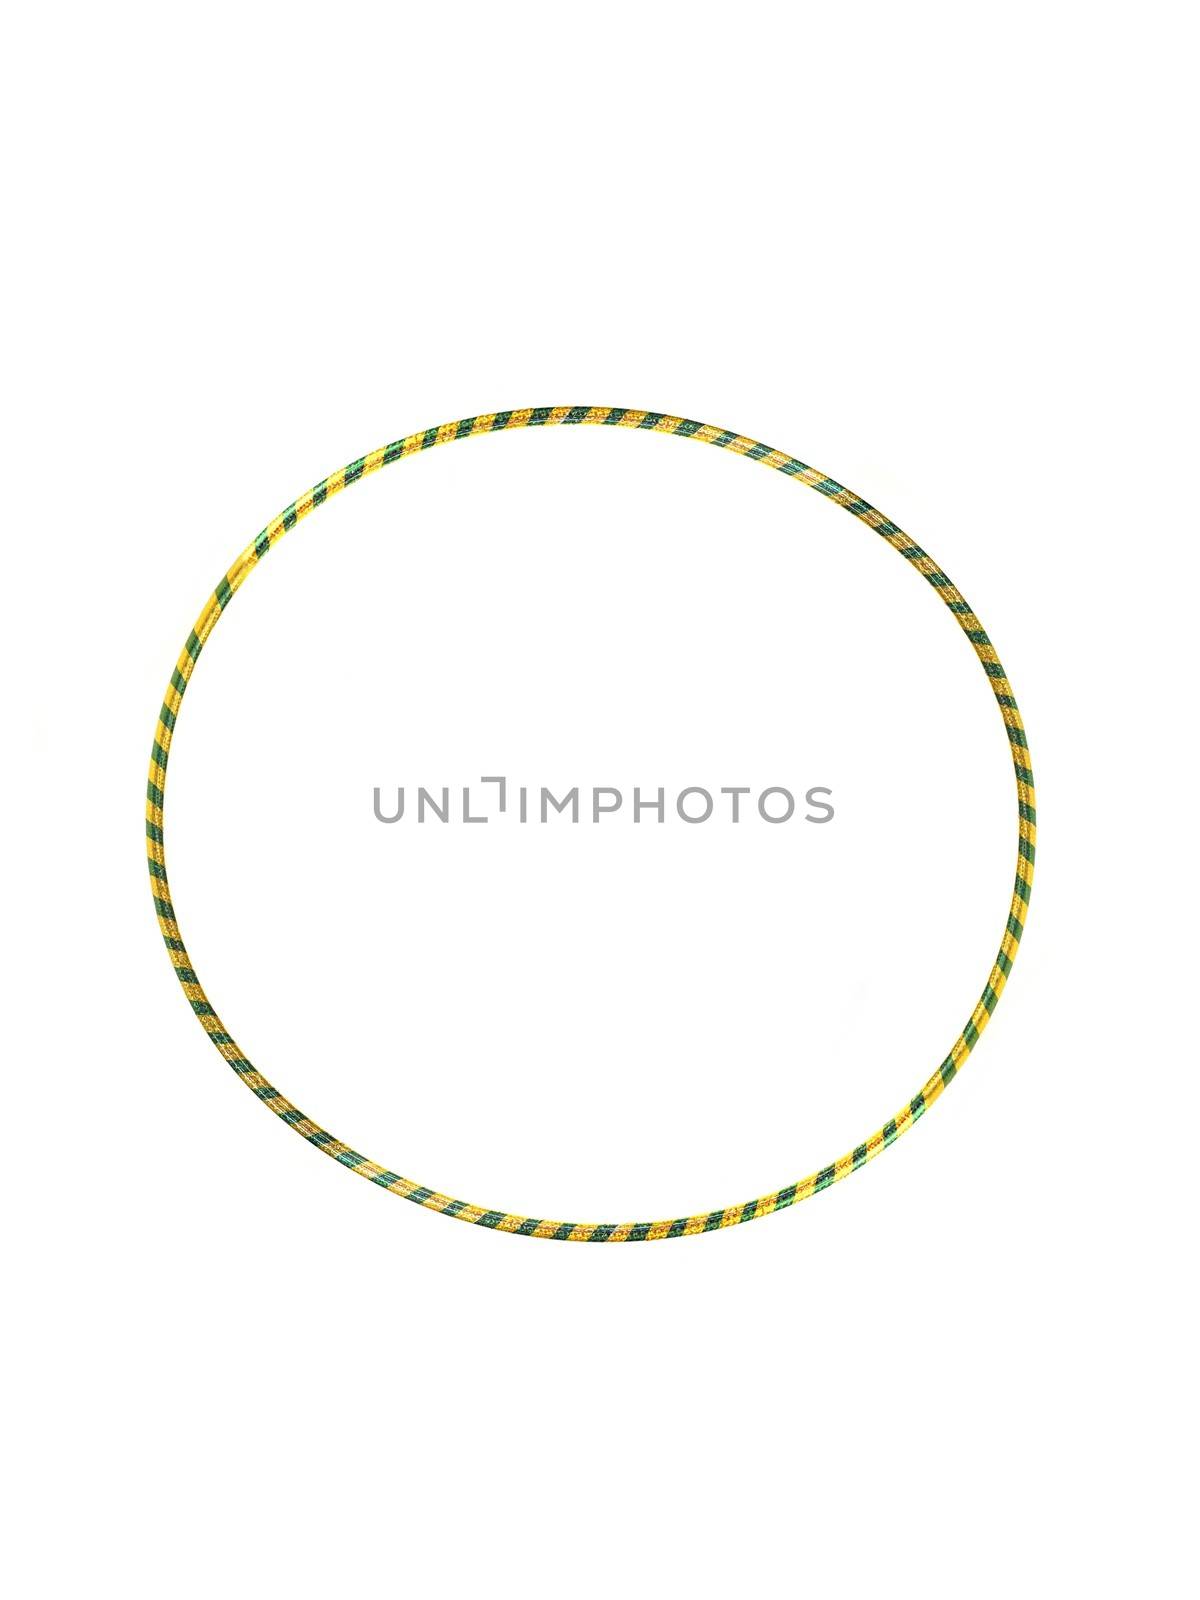 A hula hoop isolated against a white background